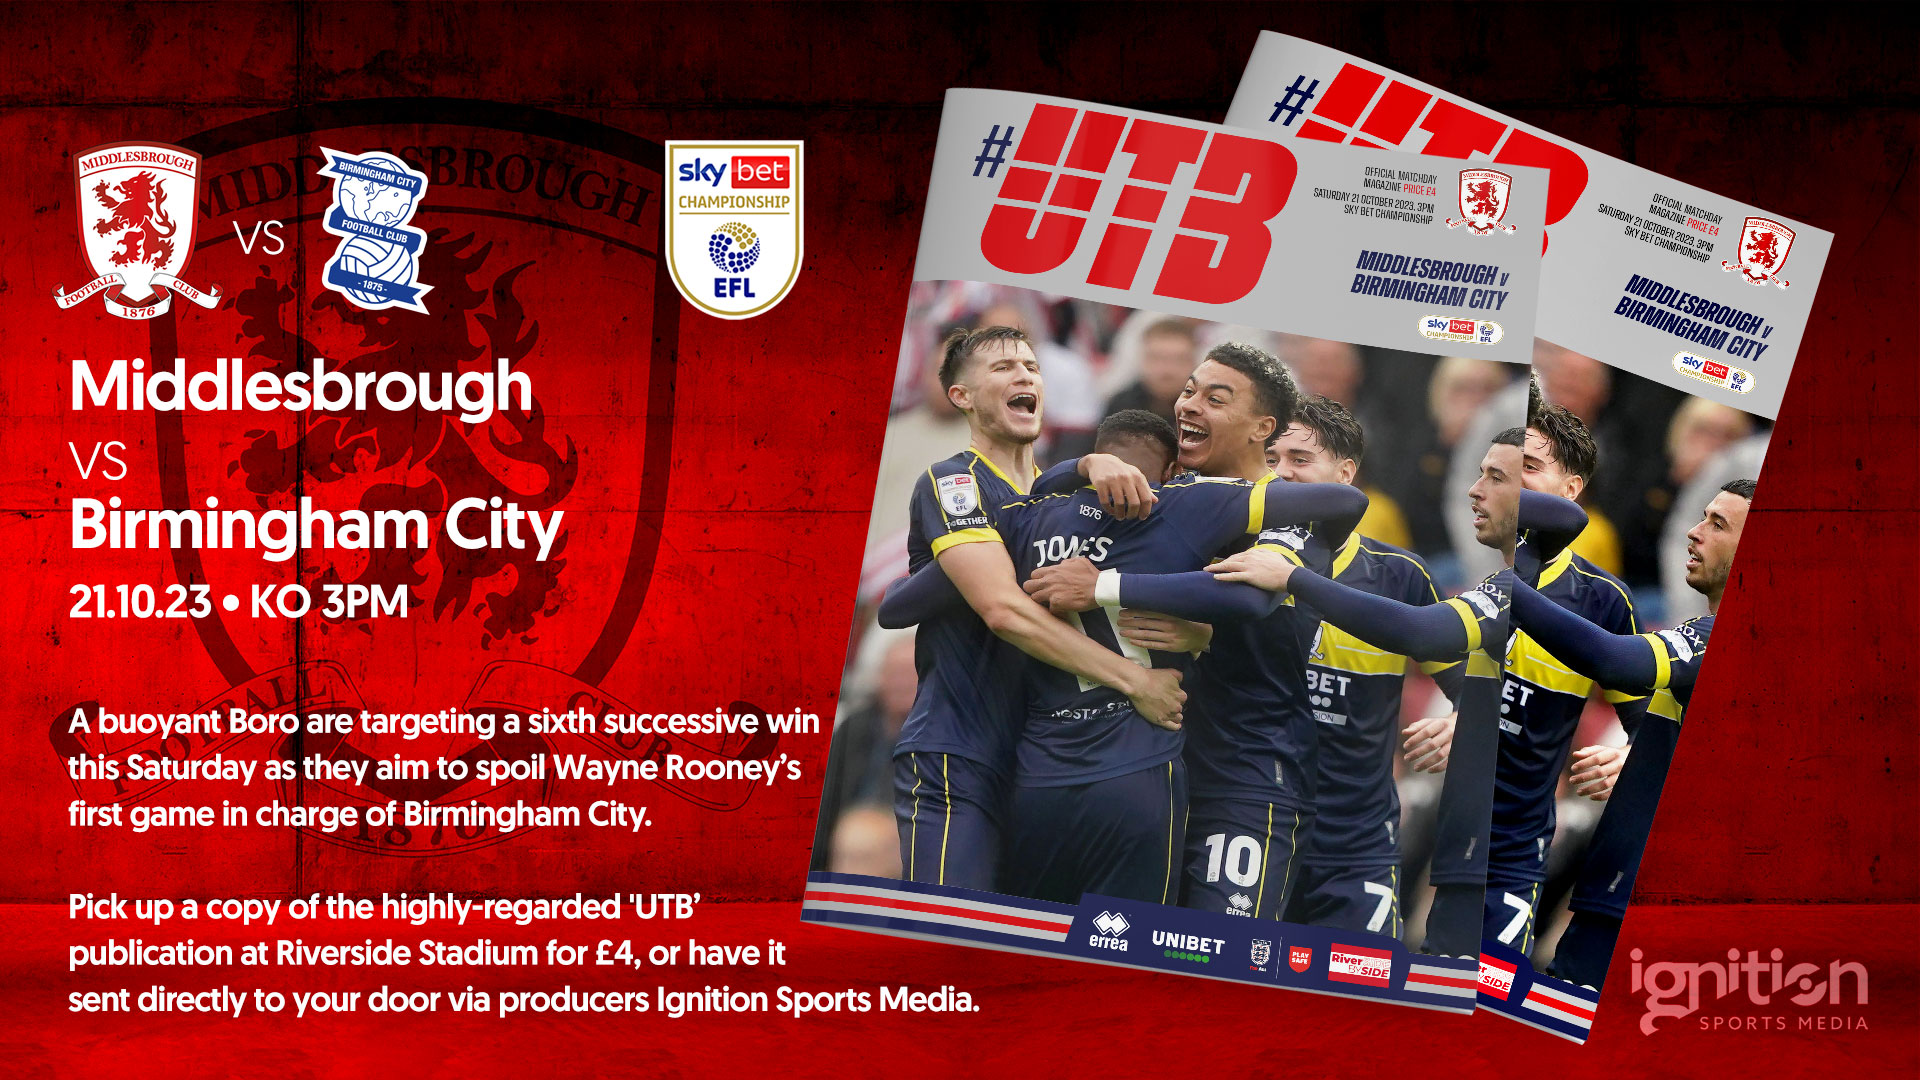 Matchday Guide, City vs. Middlesbrough